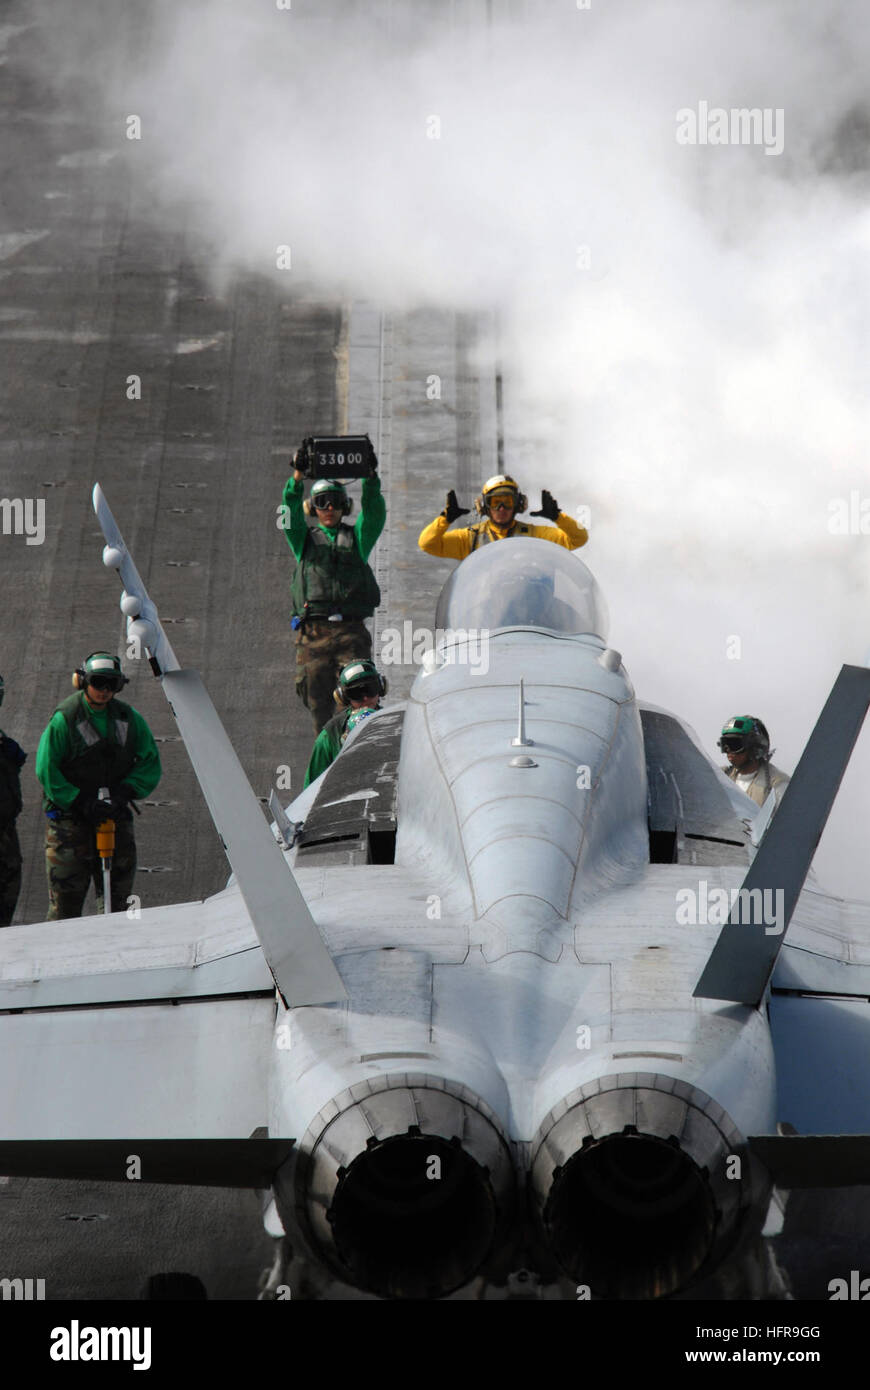 060829-N-7526R-050 Pacific Ocean (Aug. 29, 2006) - An aircraft handler lines up an F/A-18C Hornet on the number-one catapult prior to take off during flight operations aboard the Nimitz-class aircraft carrier USS Ronald Reagan (CVN 76). Reagan is currently underway conducting Fleet Replacement Squadron Carrier Qualifications (FRS-CQ). U.S. Navy photo by Mass Communication Specialist 3rd Class Marc Rockwell-Pate (RELEASED) US Navy 060829-N-7526R-050 An aircraft handler lines up an F-A-18C Hornet on the number-one catapult prior to take off during flight operations aboard the Nimitz-class aircra Stock Photo